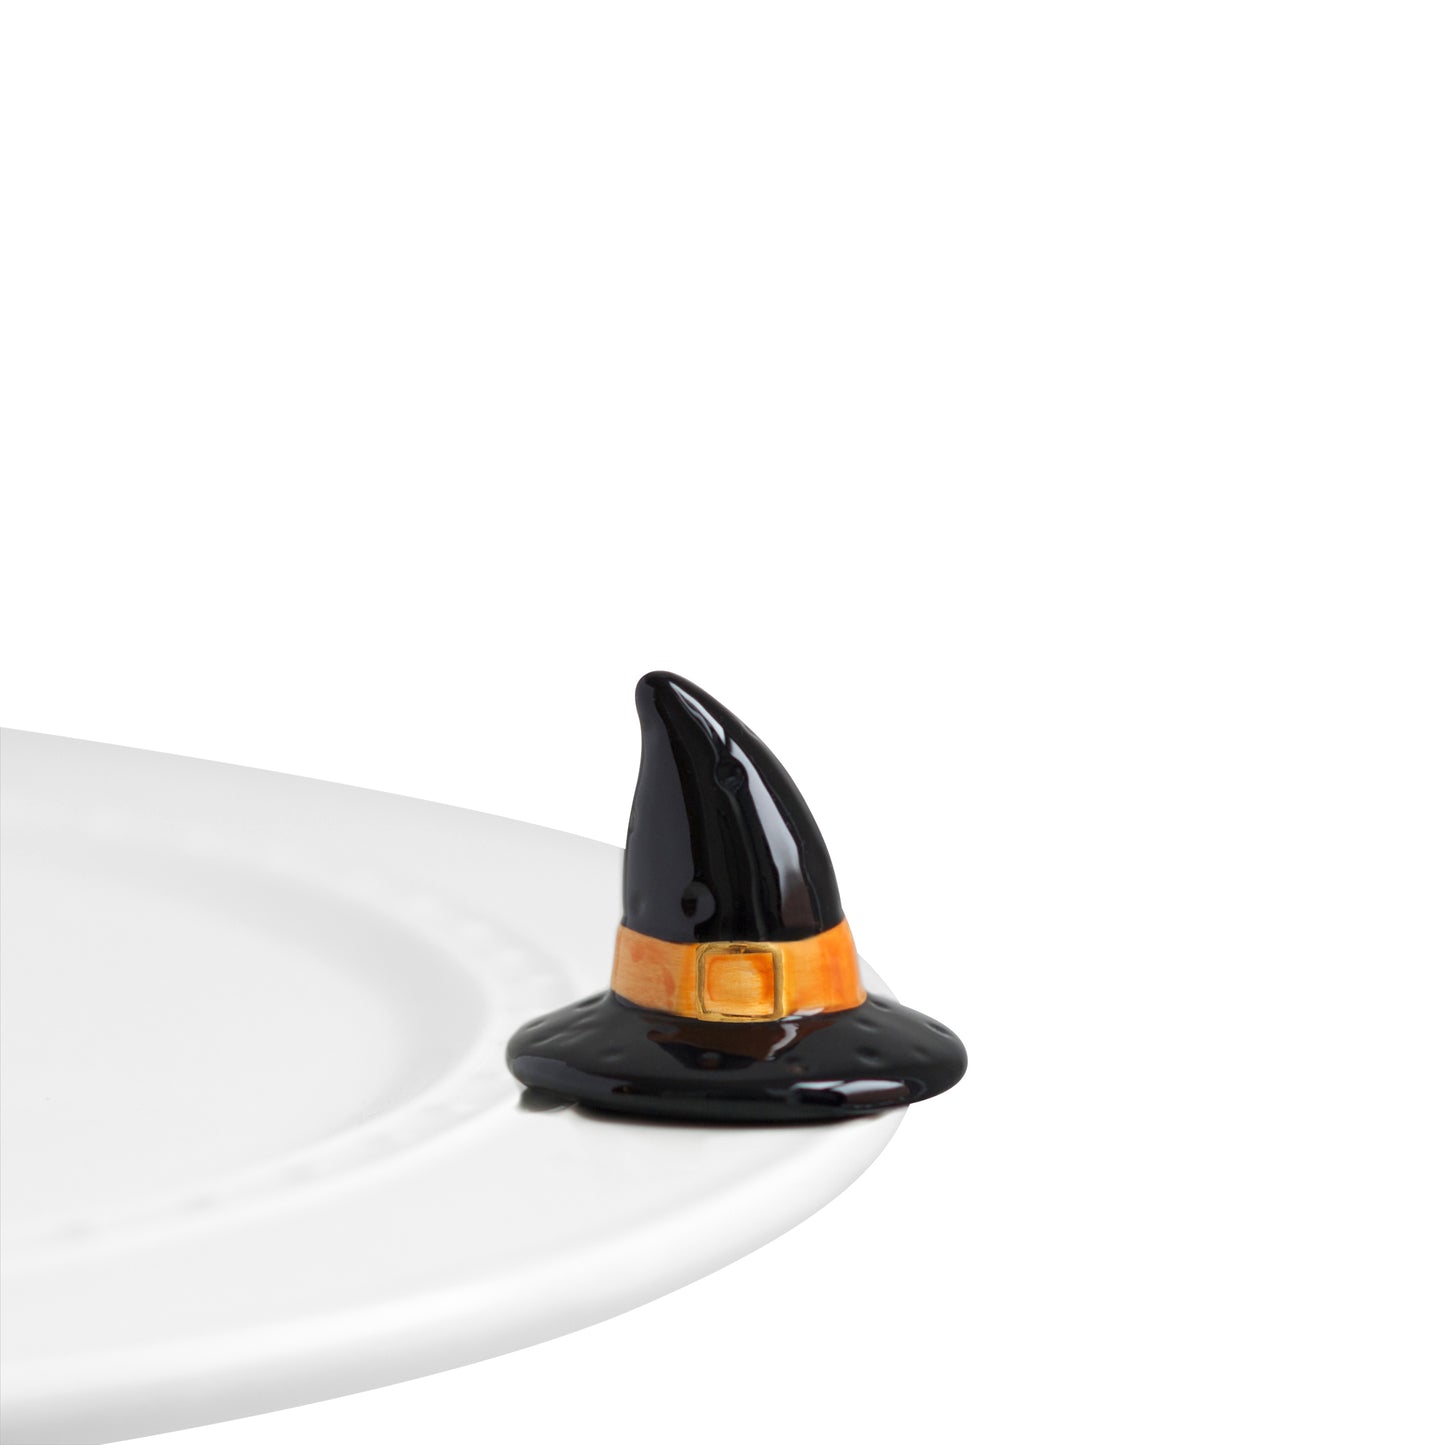 A68 Nora Fleming Witchful Thinking witch hat mini, black with orange band and gold buckle accent. Shop at The Painted Cottage in Edgewater, MD.